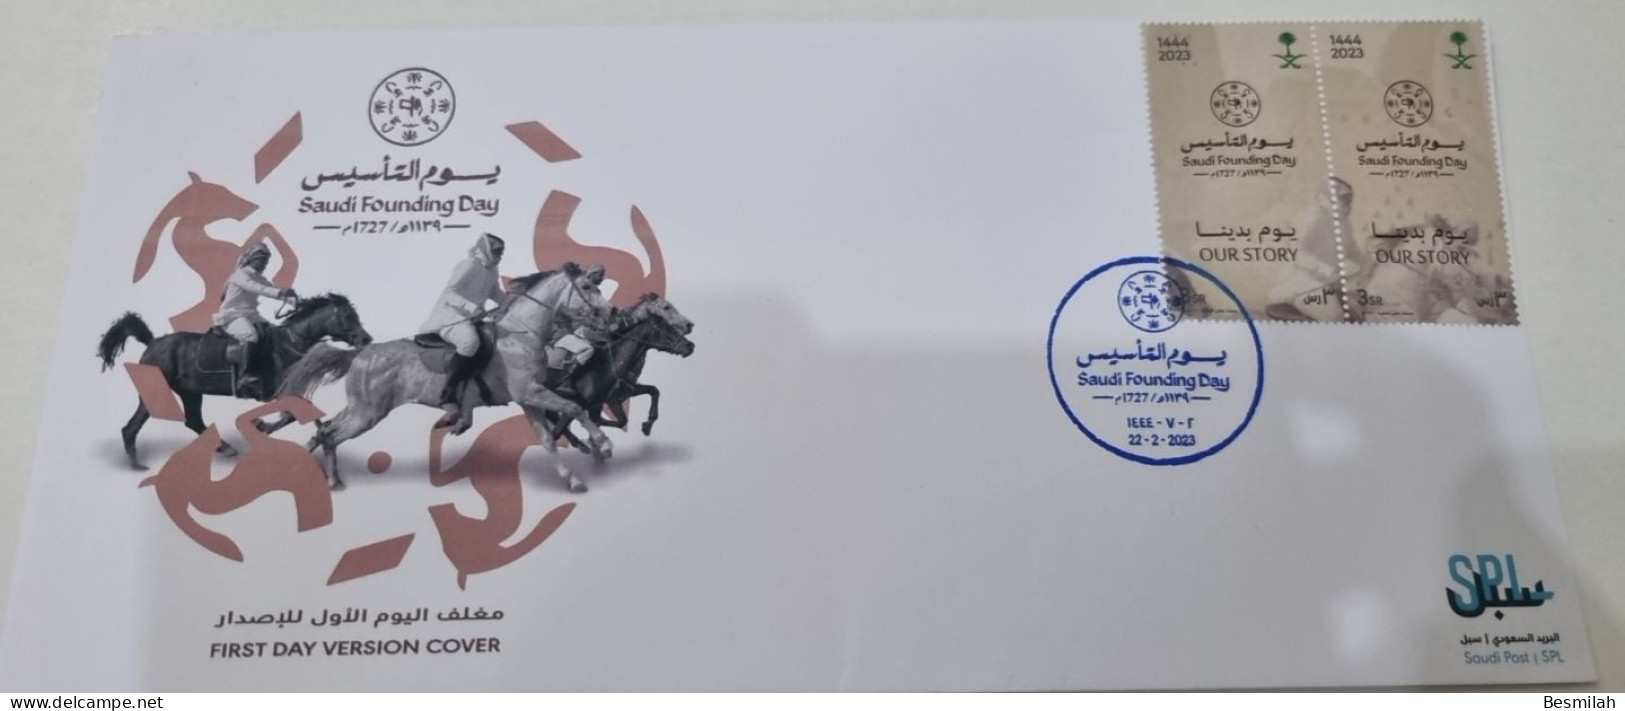 Saudi Arabia Stamp Founding Day 2023 (1445 Hijry) 4 Pieces Of 3 Riyals And 2FDVC + Card - Arabie Saoudite